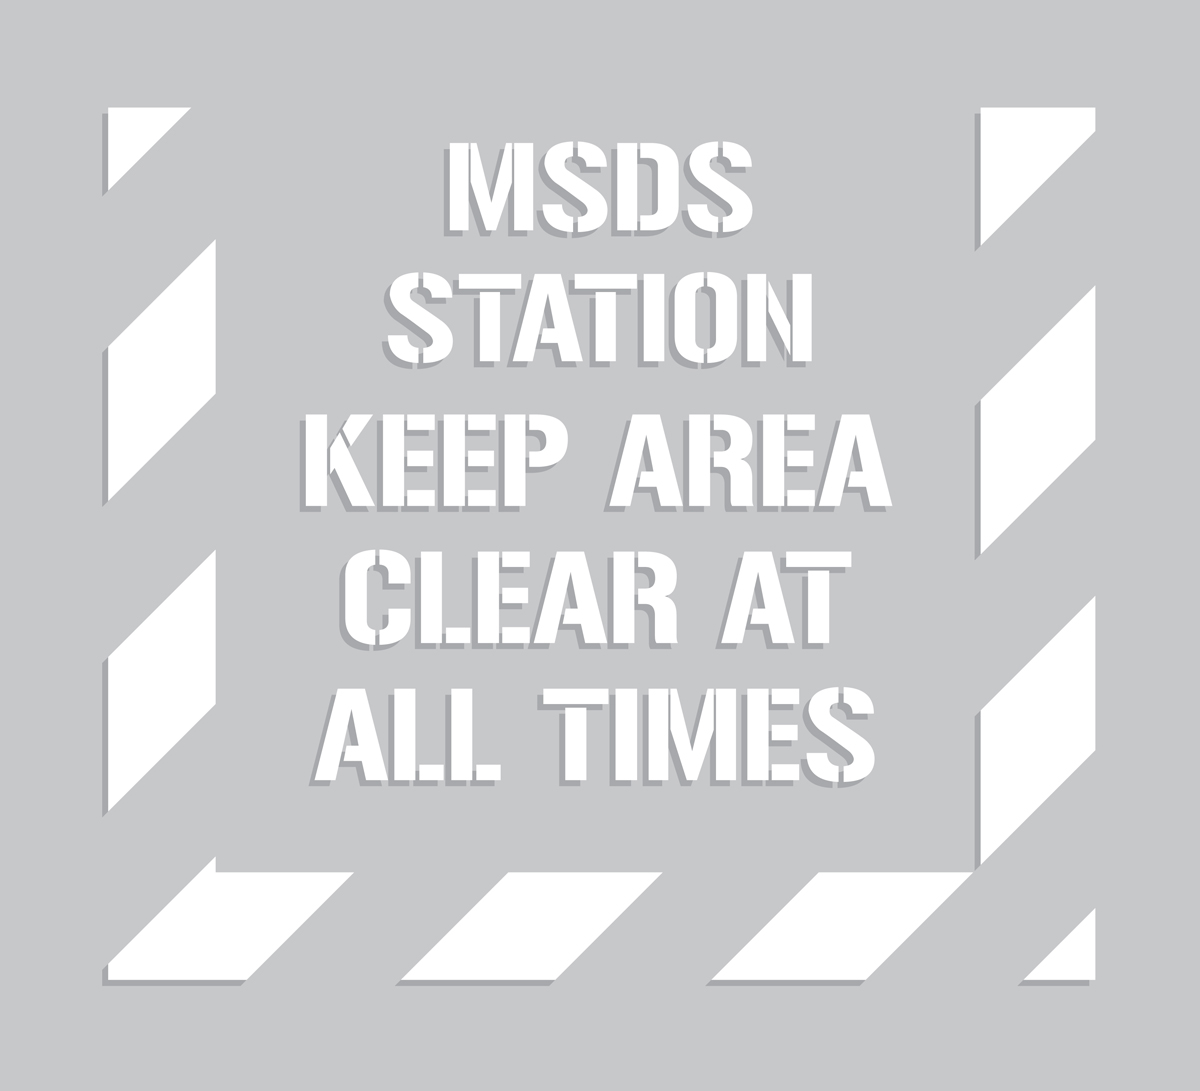 MSDS STATION KEEP AREA CLEAR AT ALL TIMES